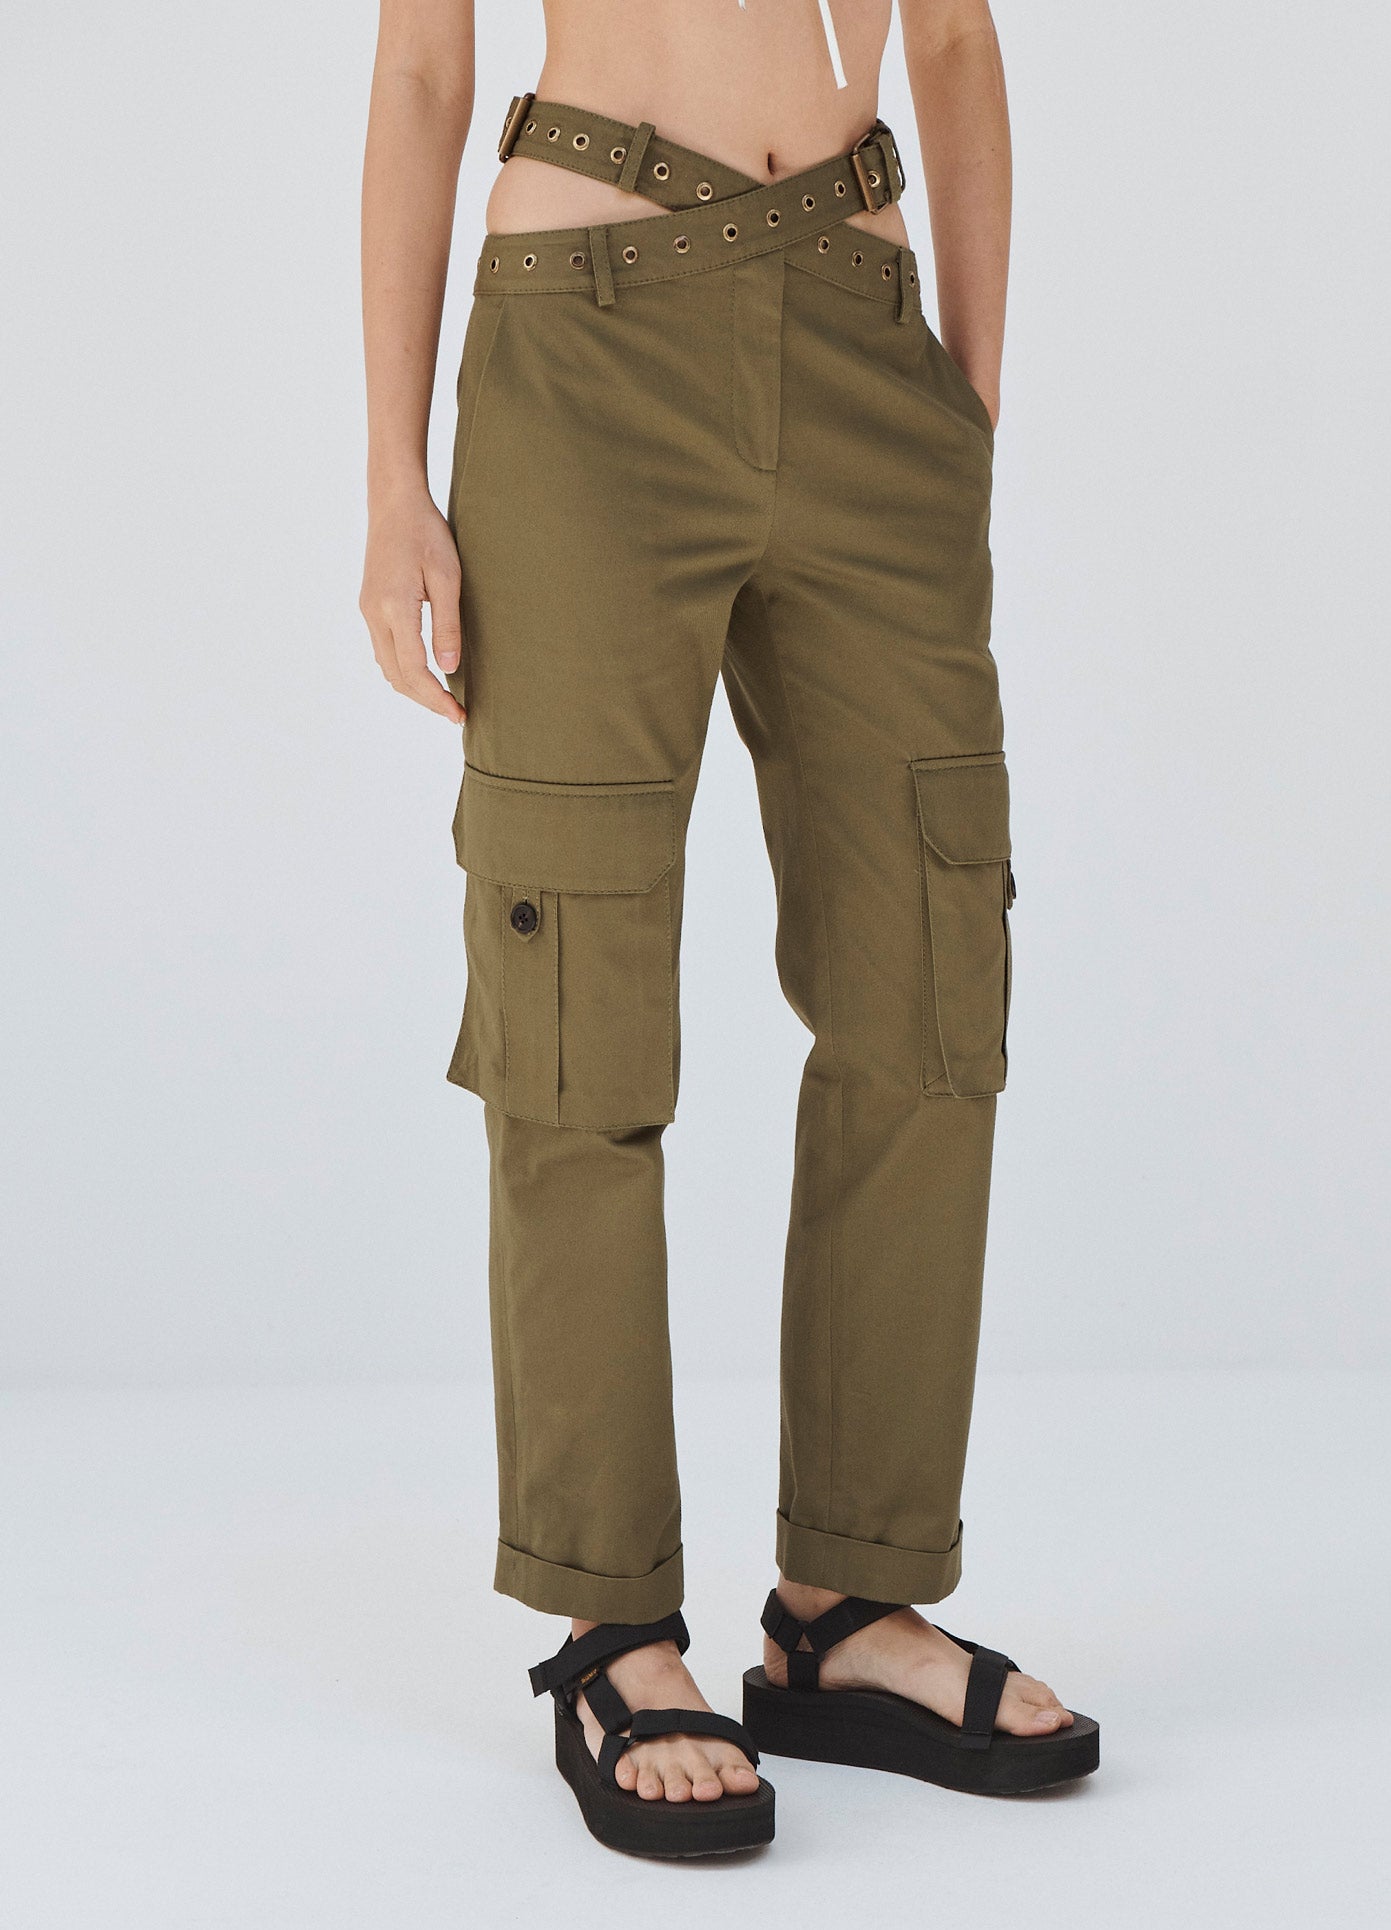 MONSE Criss Cross Waistband Cargo Pocket Pants in Olive on Model Pant Detail View